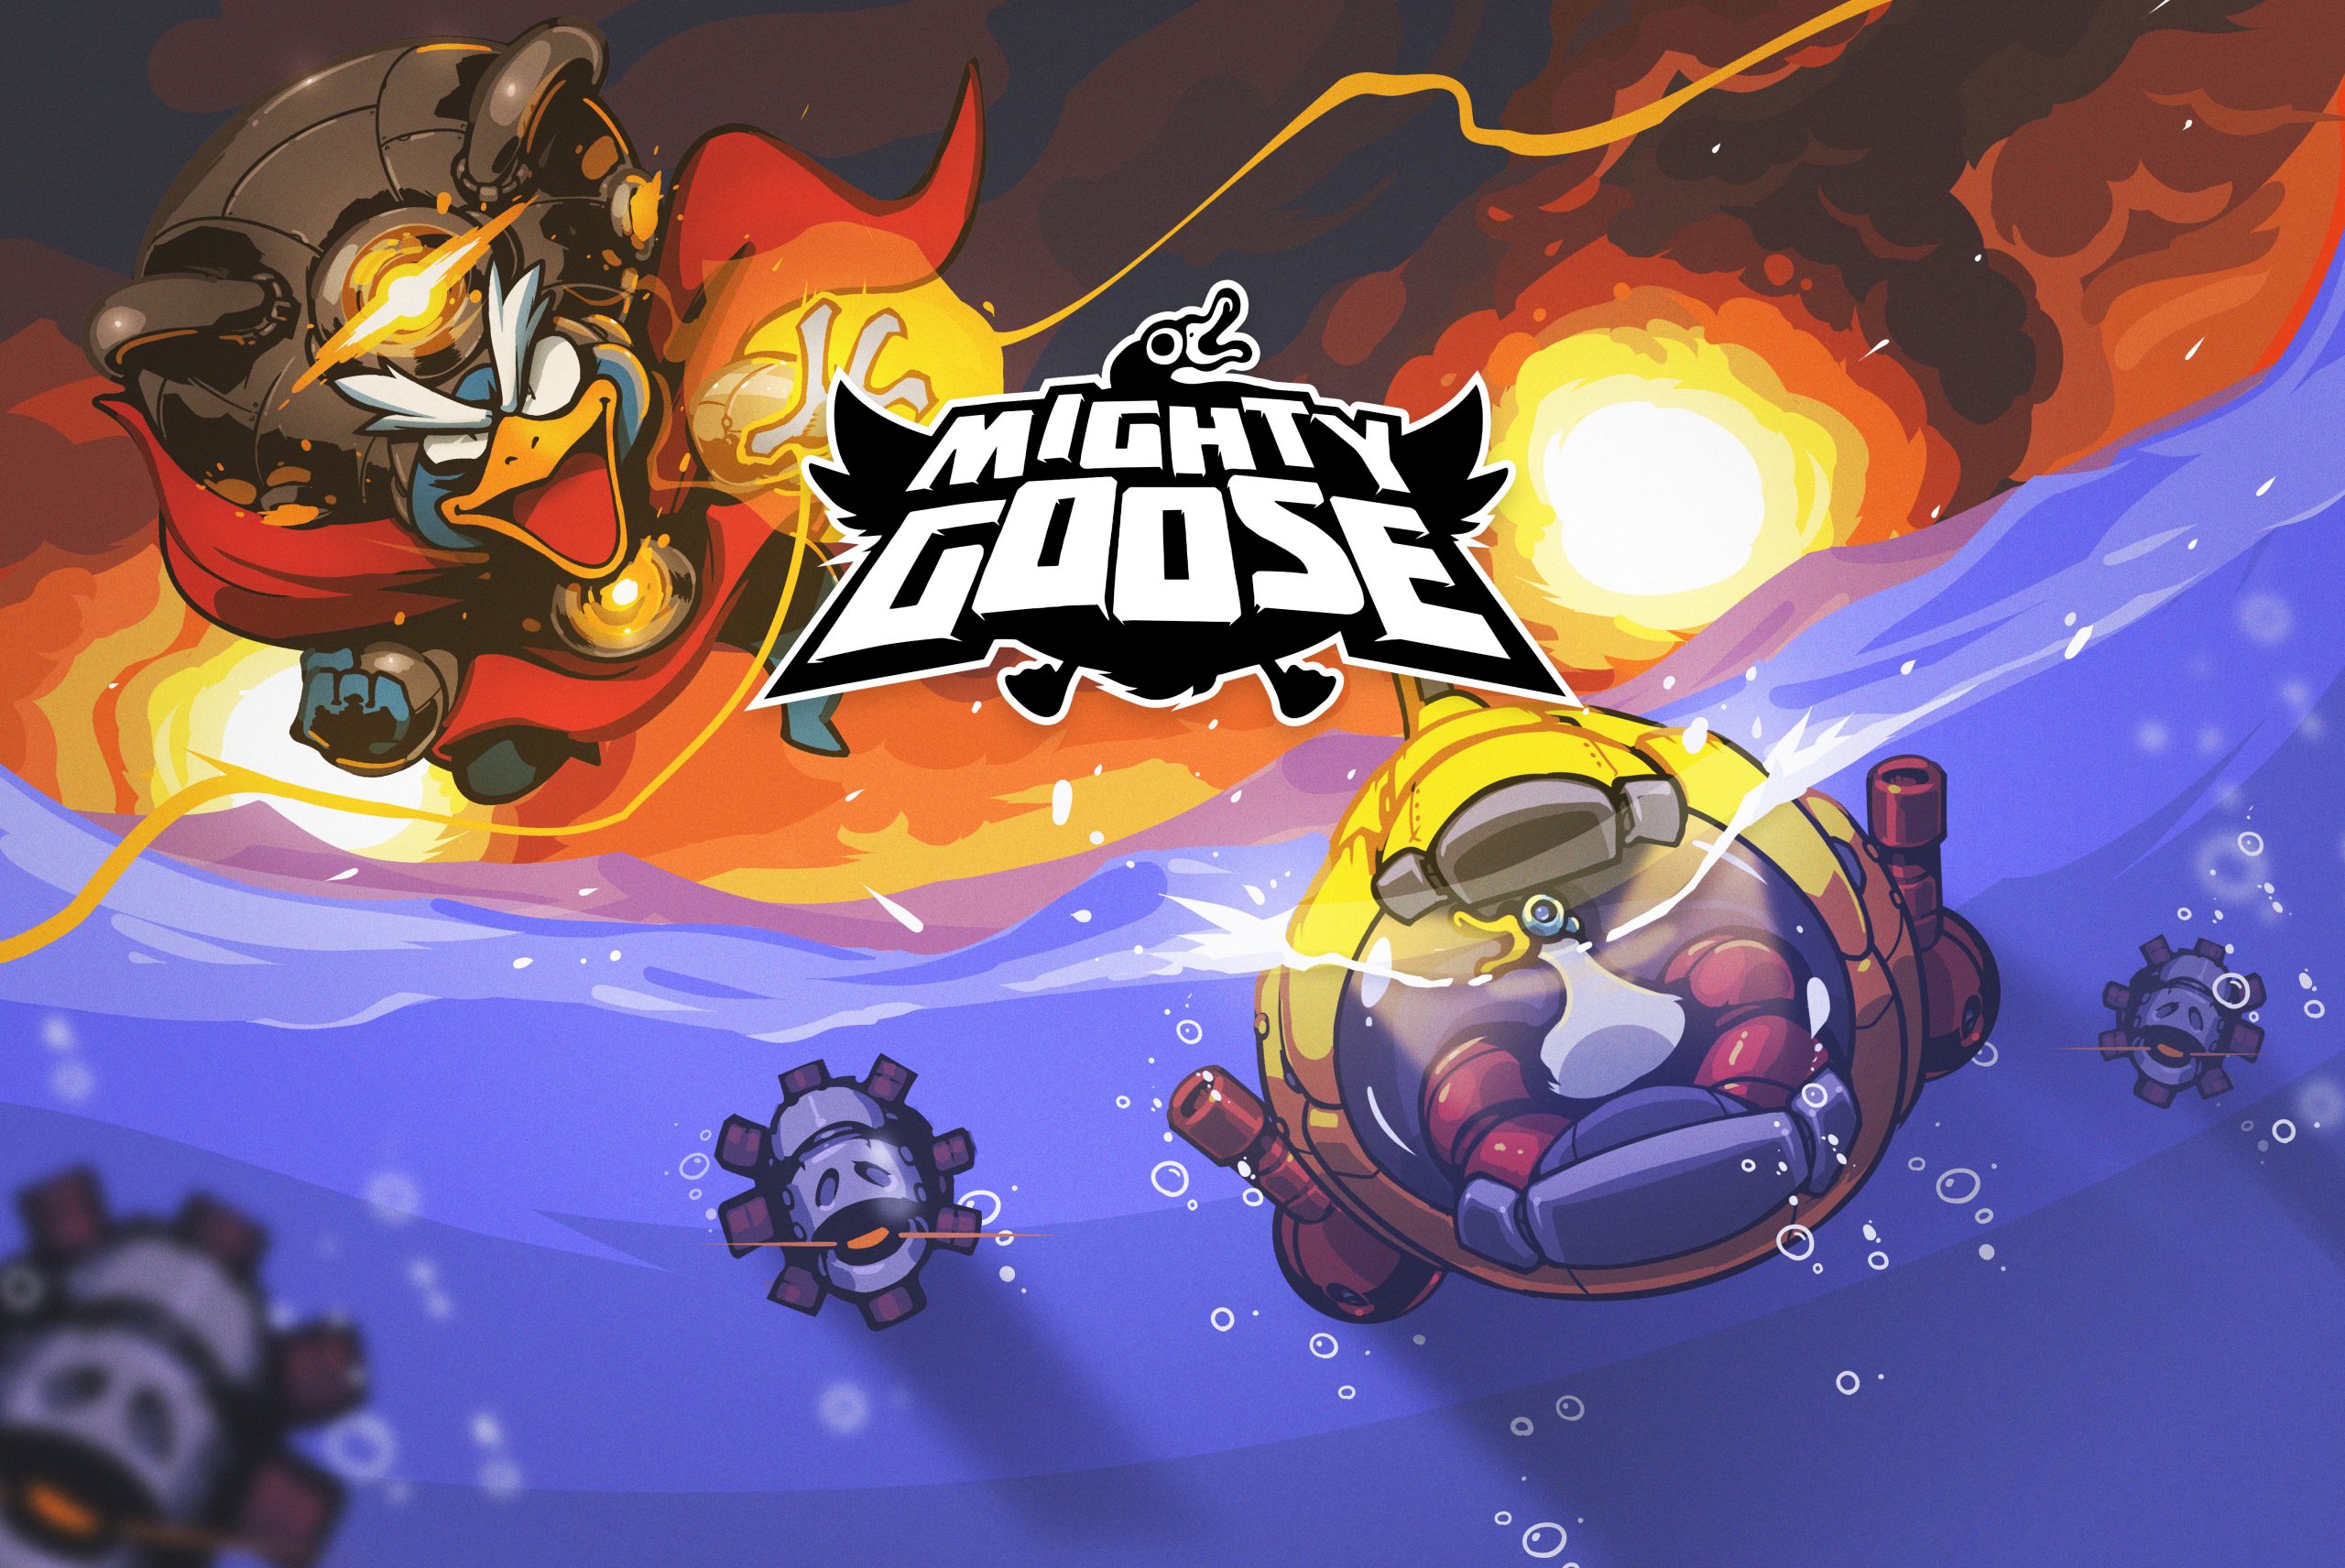 Unleash Destruction and Mayhem in 2D Action Game Mighty Goose! Free DLC Update Available Now on All Platforms!